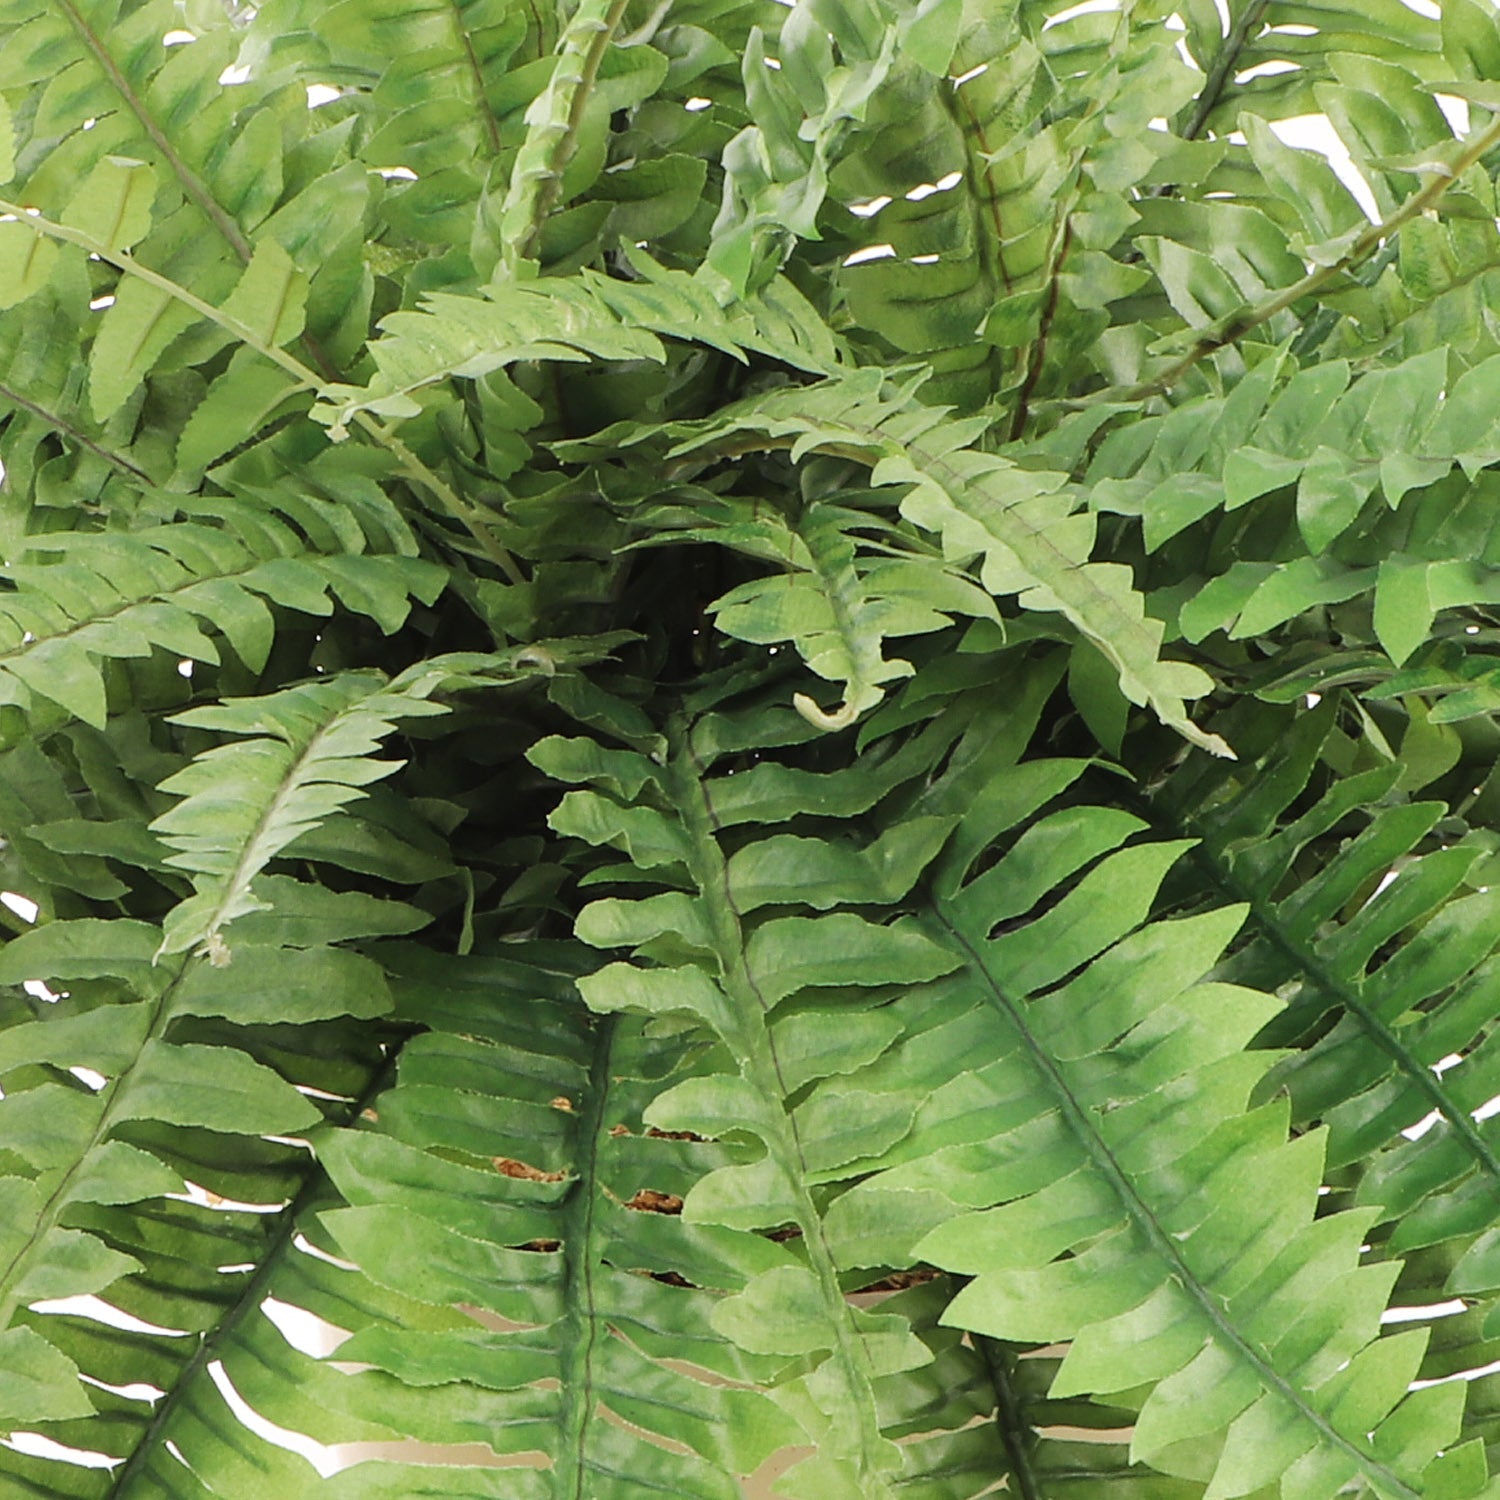 Morgan's Front Door Boston Ferns | Four 48" Ferns | Two 34" Ferns | Simply place in a Planter